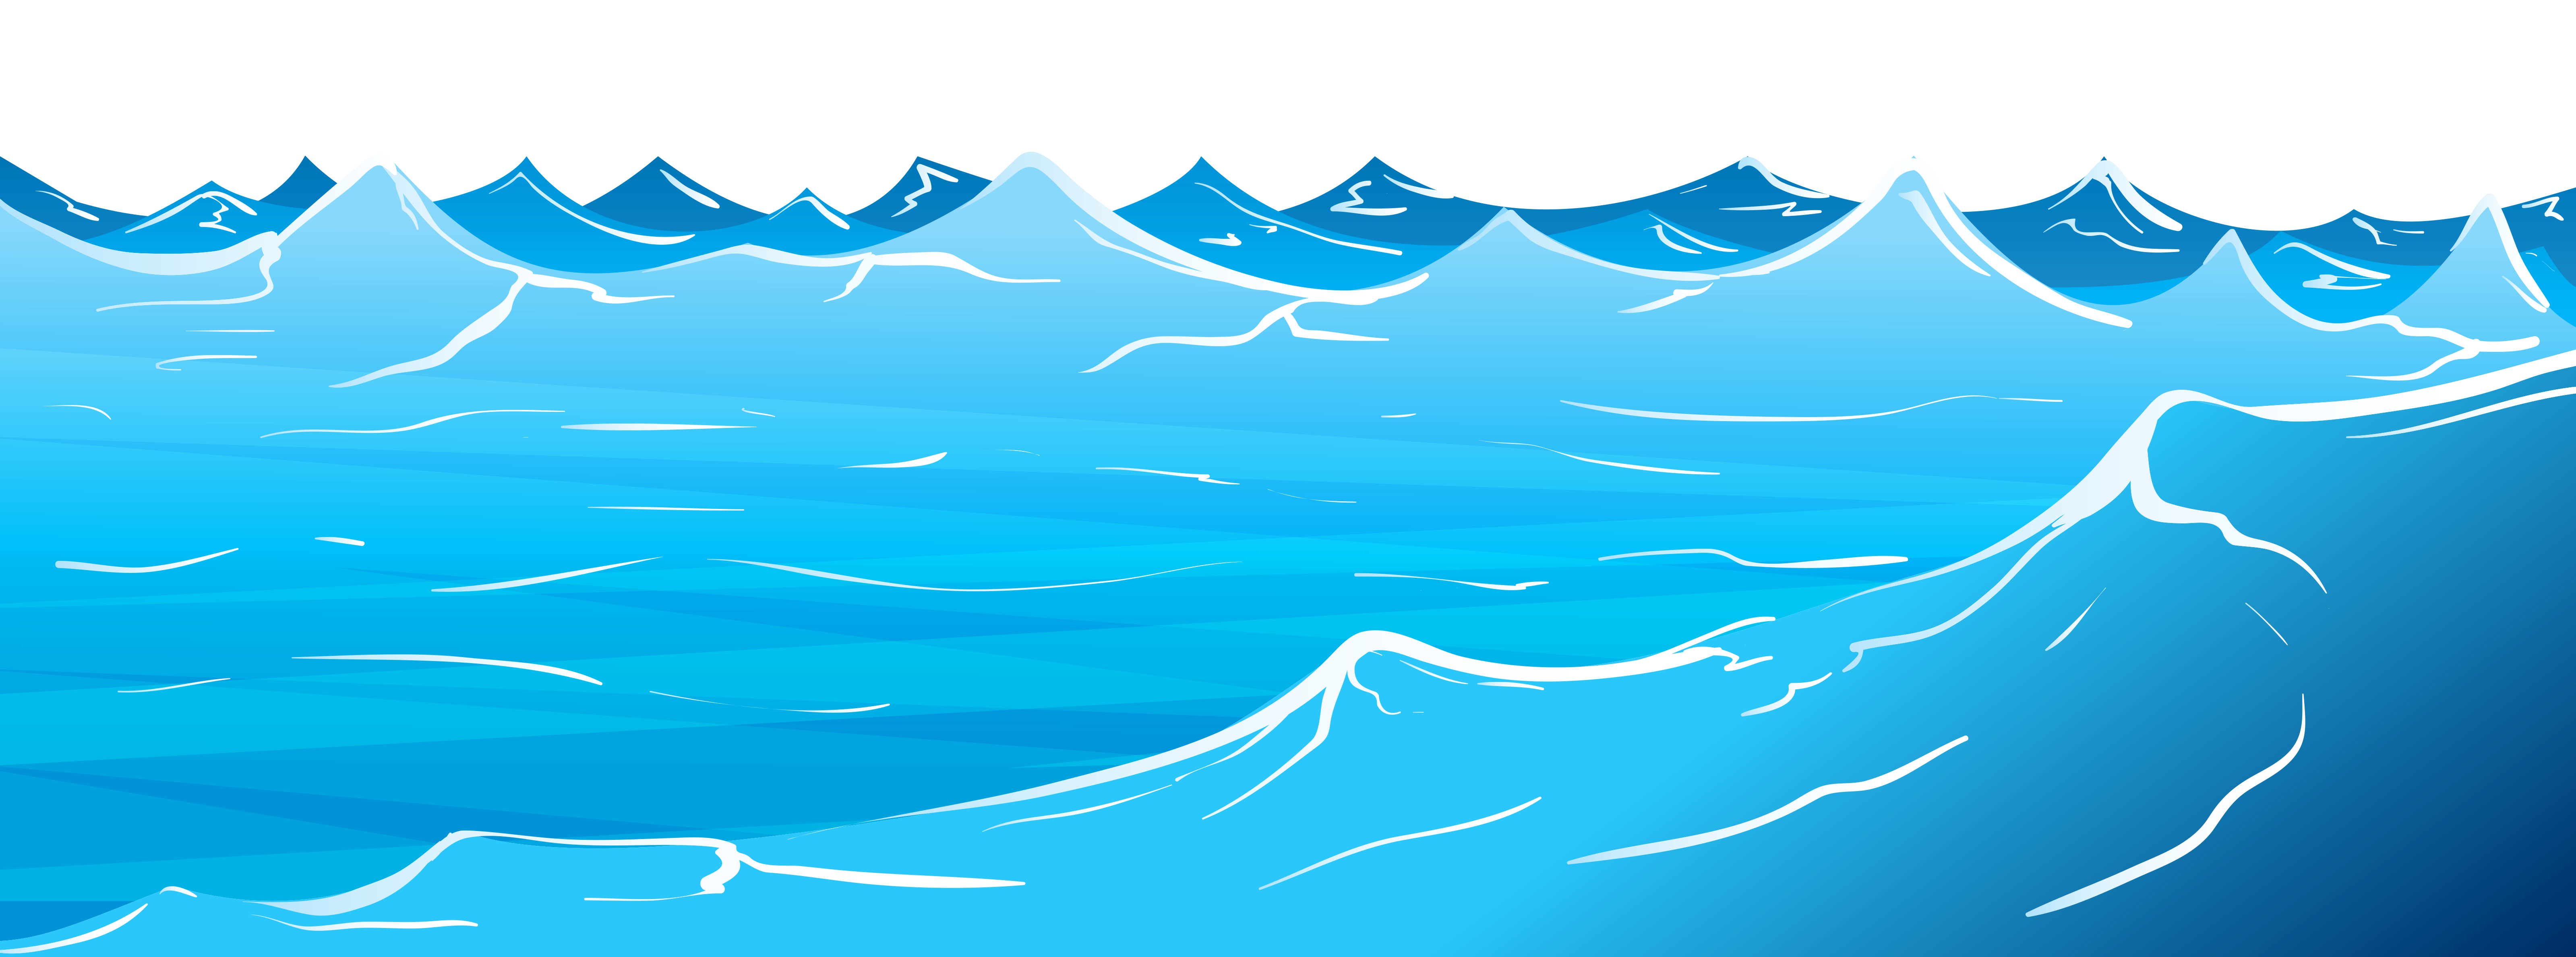 clipart water - photo #39